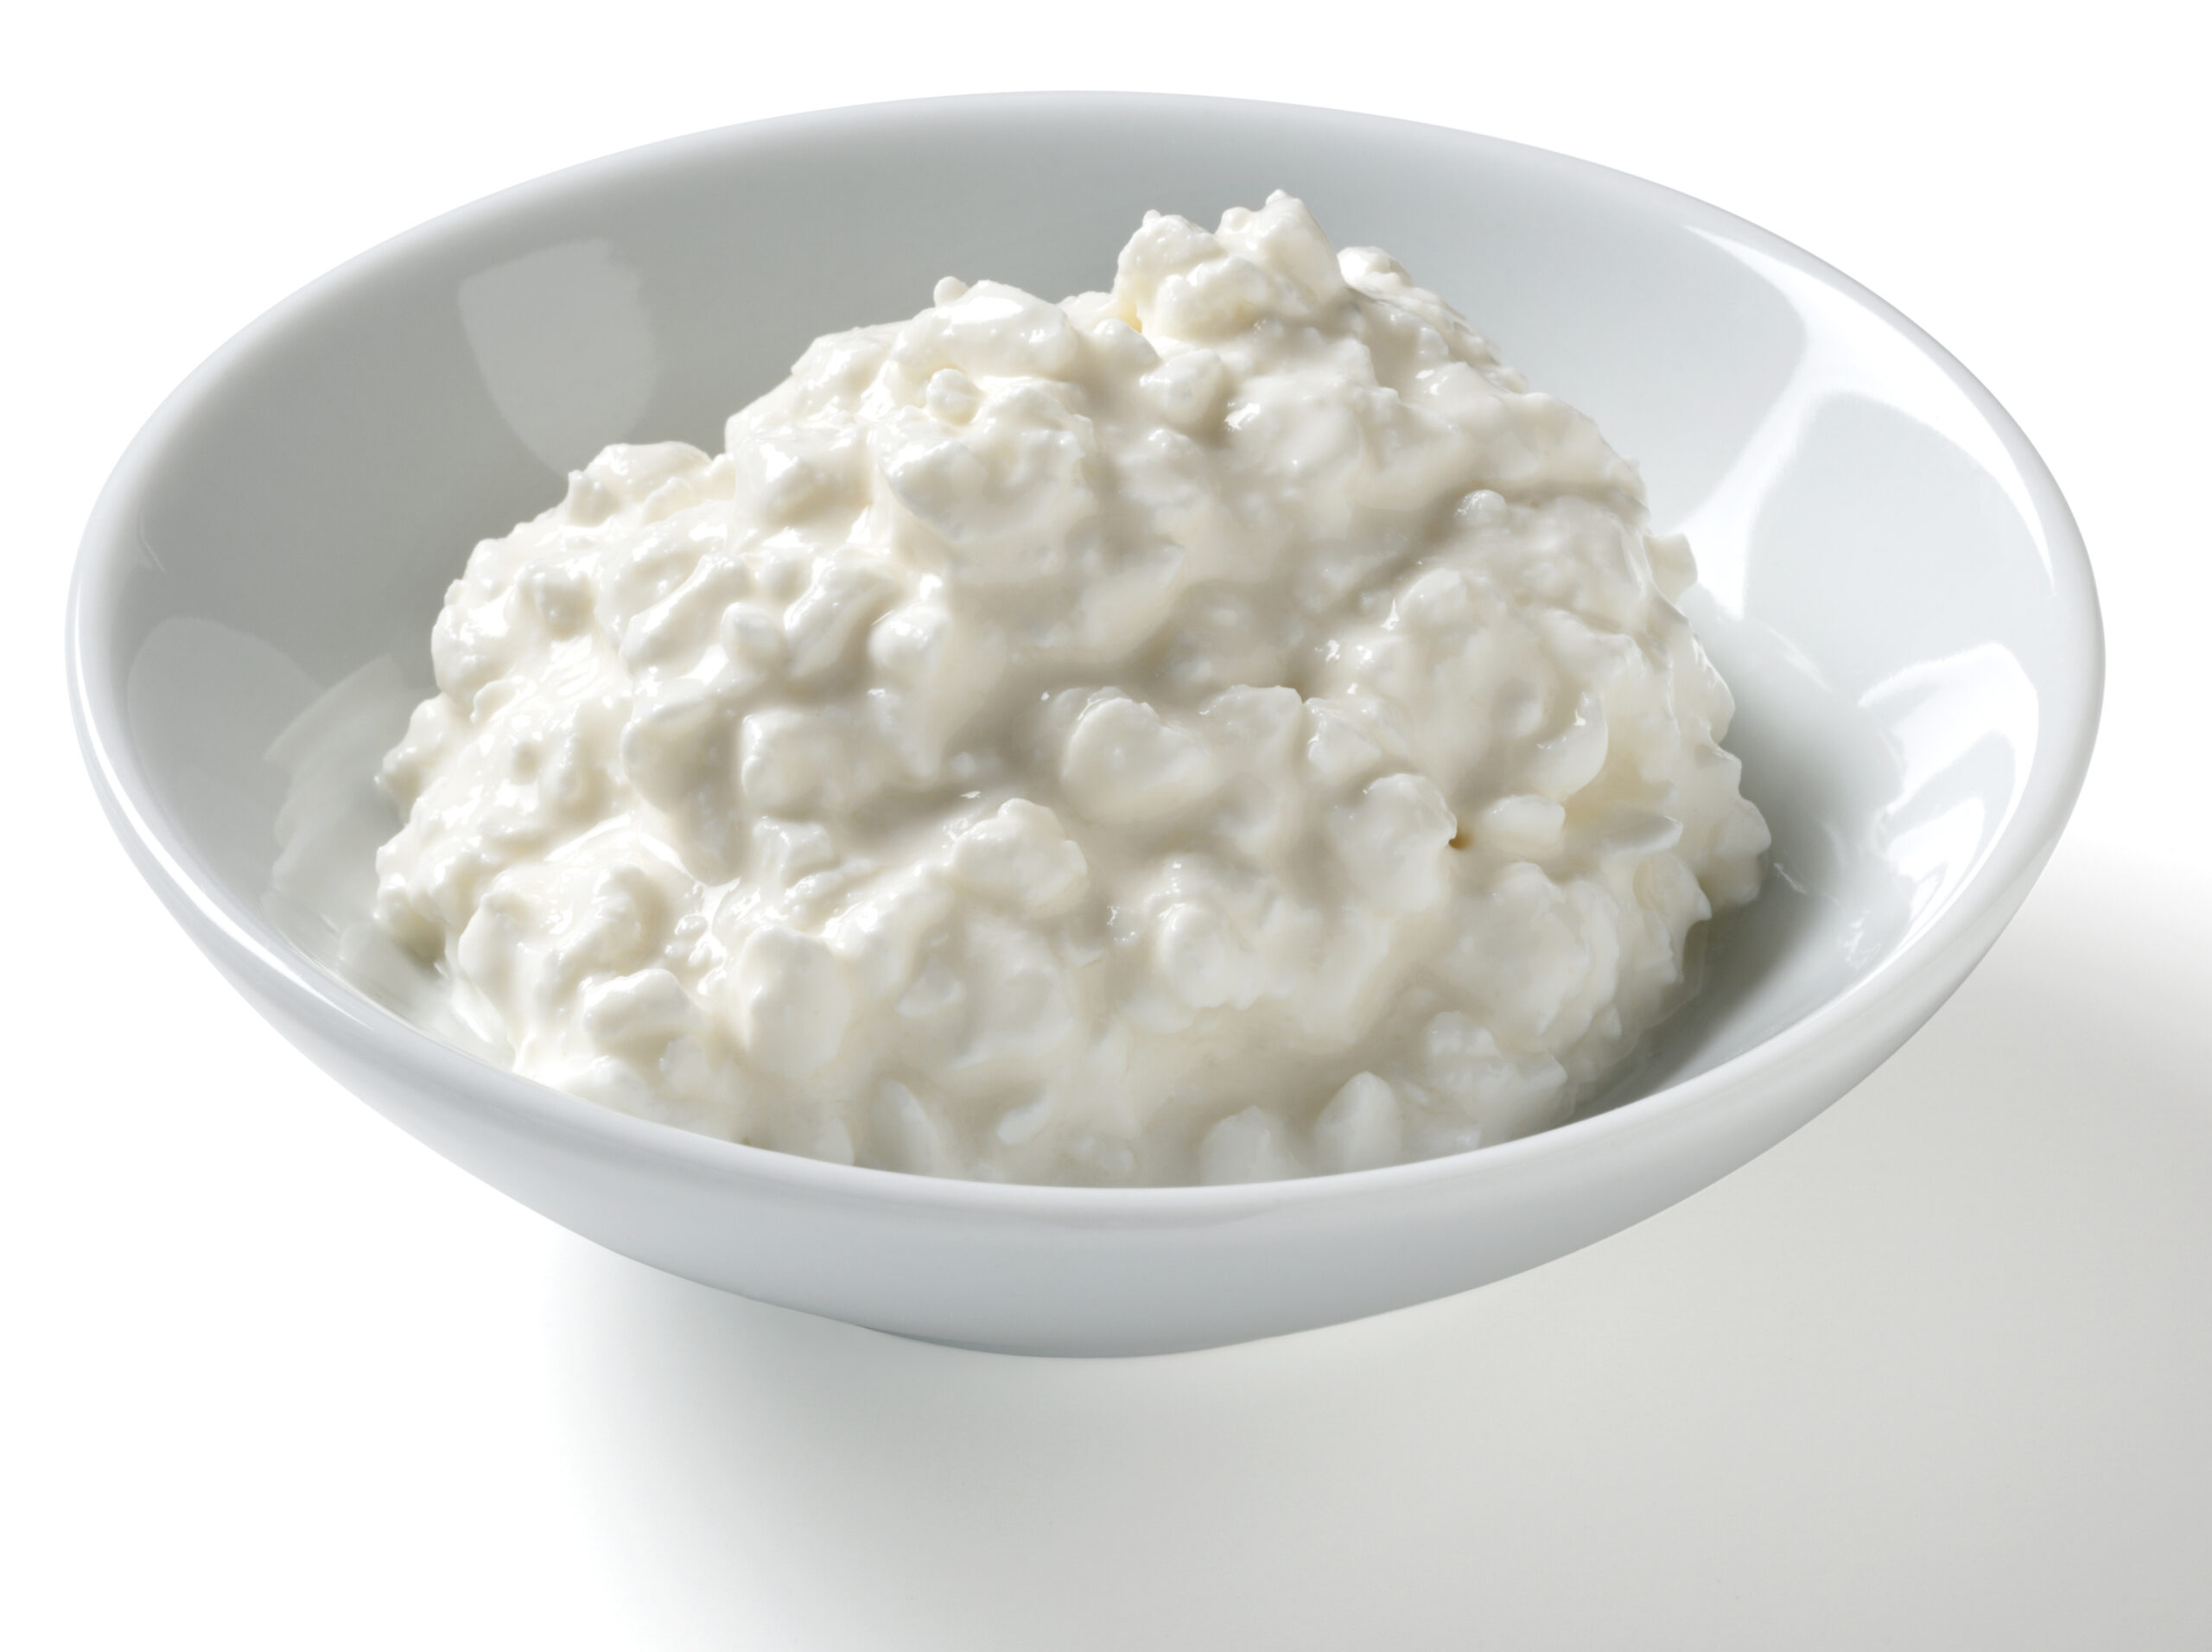 Half cup serving of low fat cottage cheese in a bowl on a white background with natural shadow.